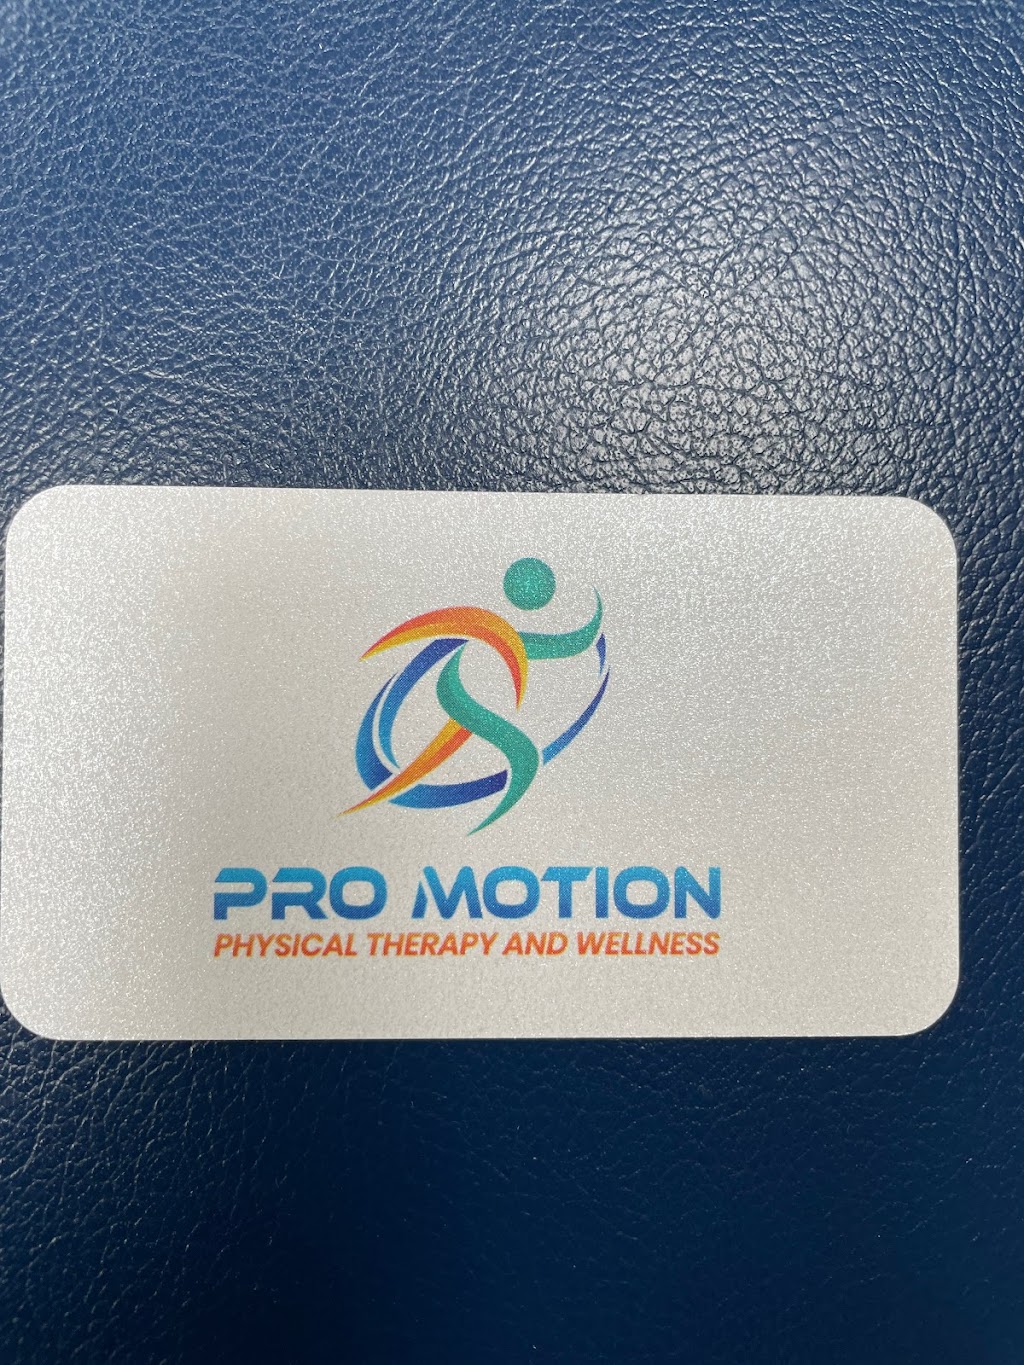 Pro motion Physical Therapy and Wellness | 101 N Washington Ave, Margate City, NJ 08402 | Phone: (609) 365-0155